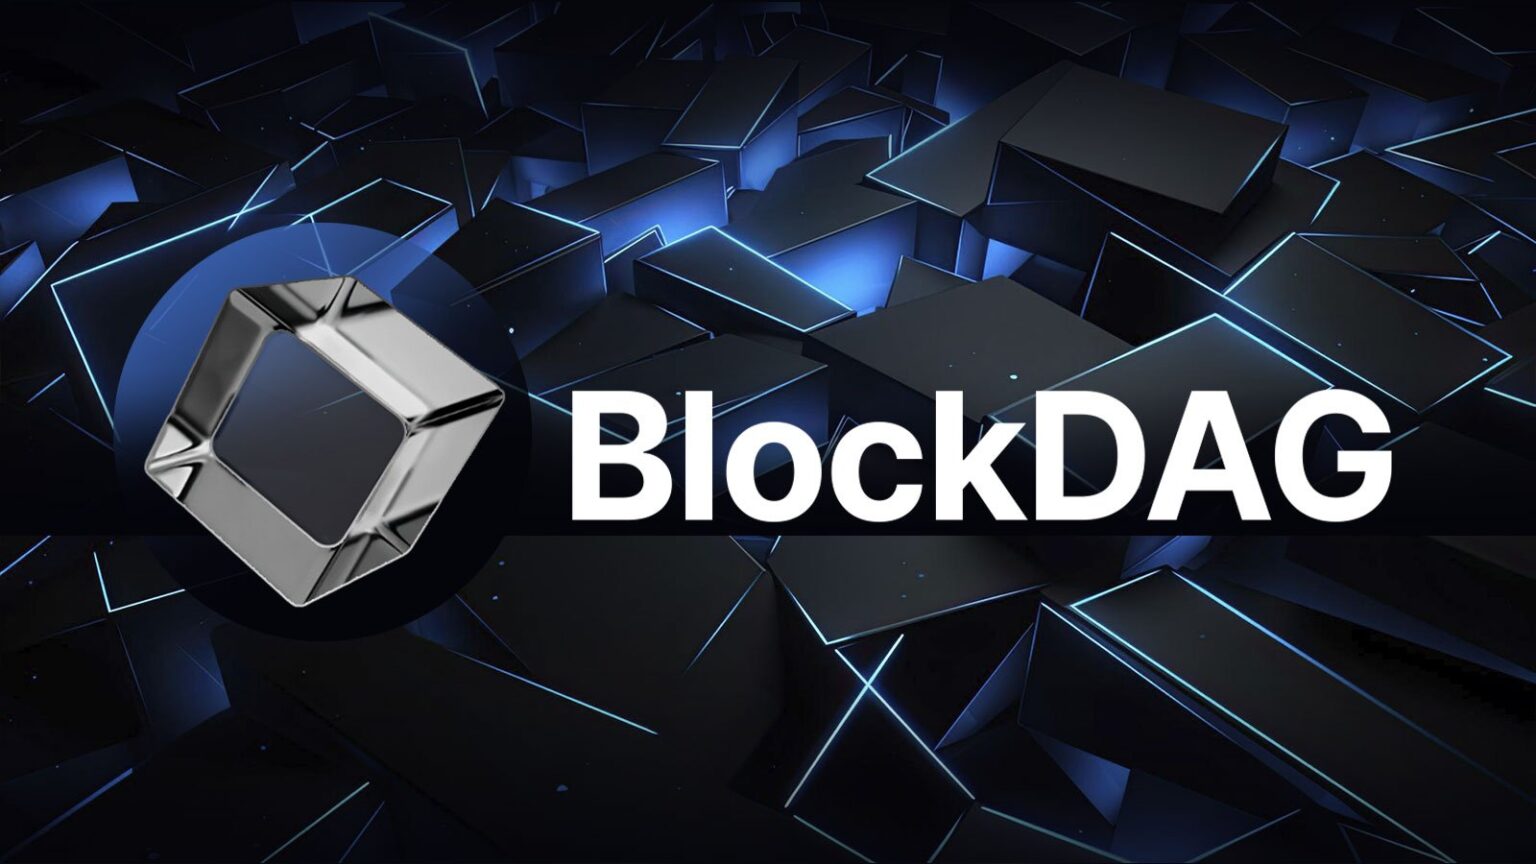 blockdag-surpasses-cardano-and-tron-in-the-crypto-landscape-with-stellar-performance-and-$25.7m-in-presale